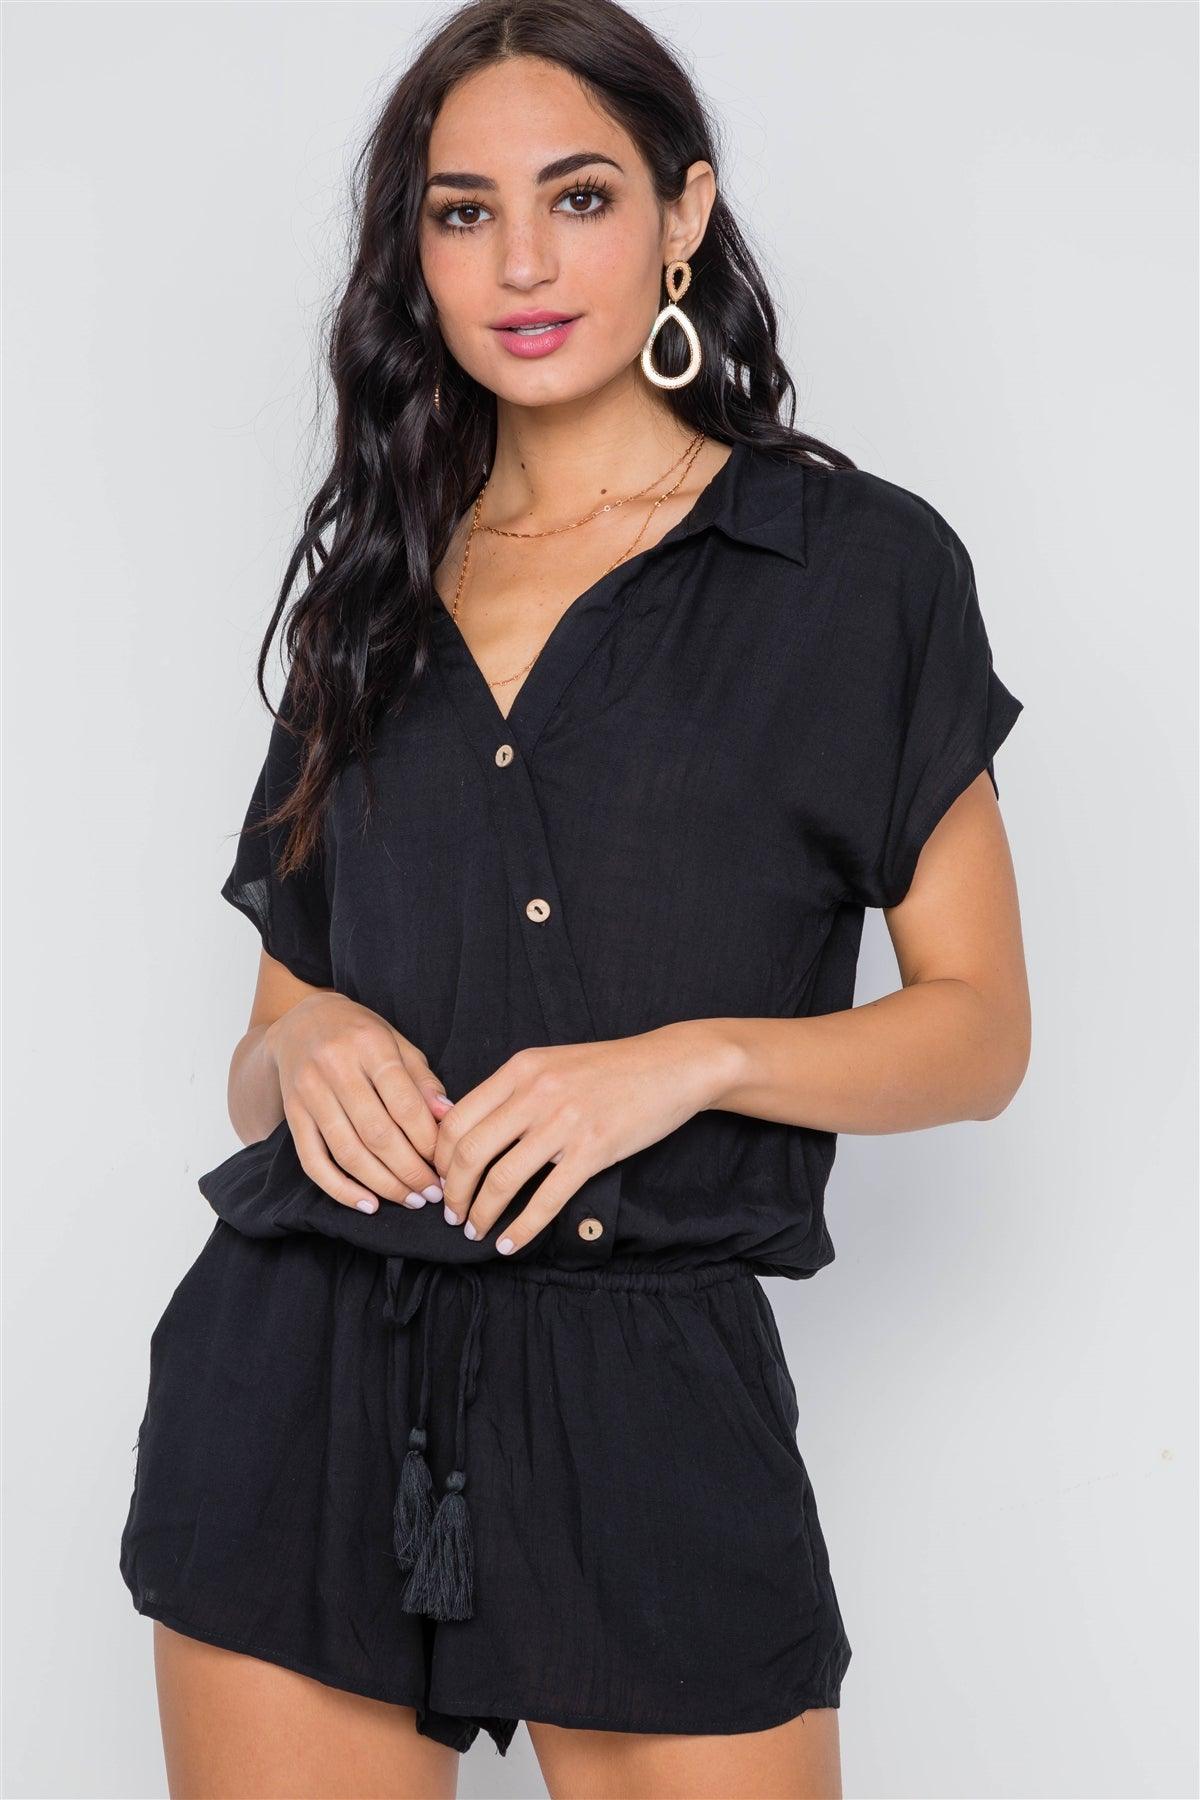 Black Short Sleeve Relaxed Fit Romper /3-2-1